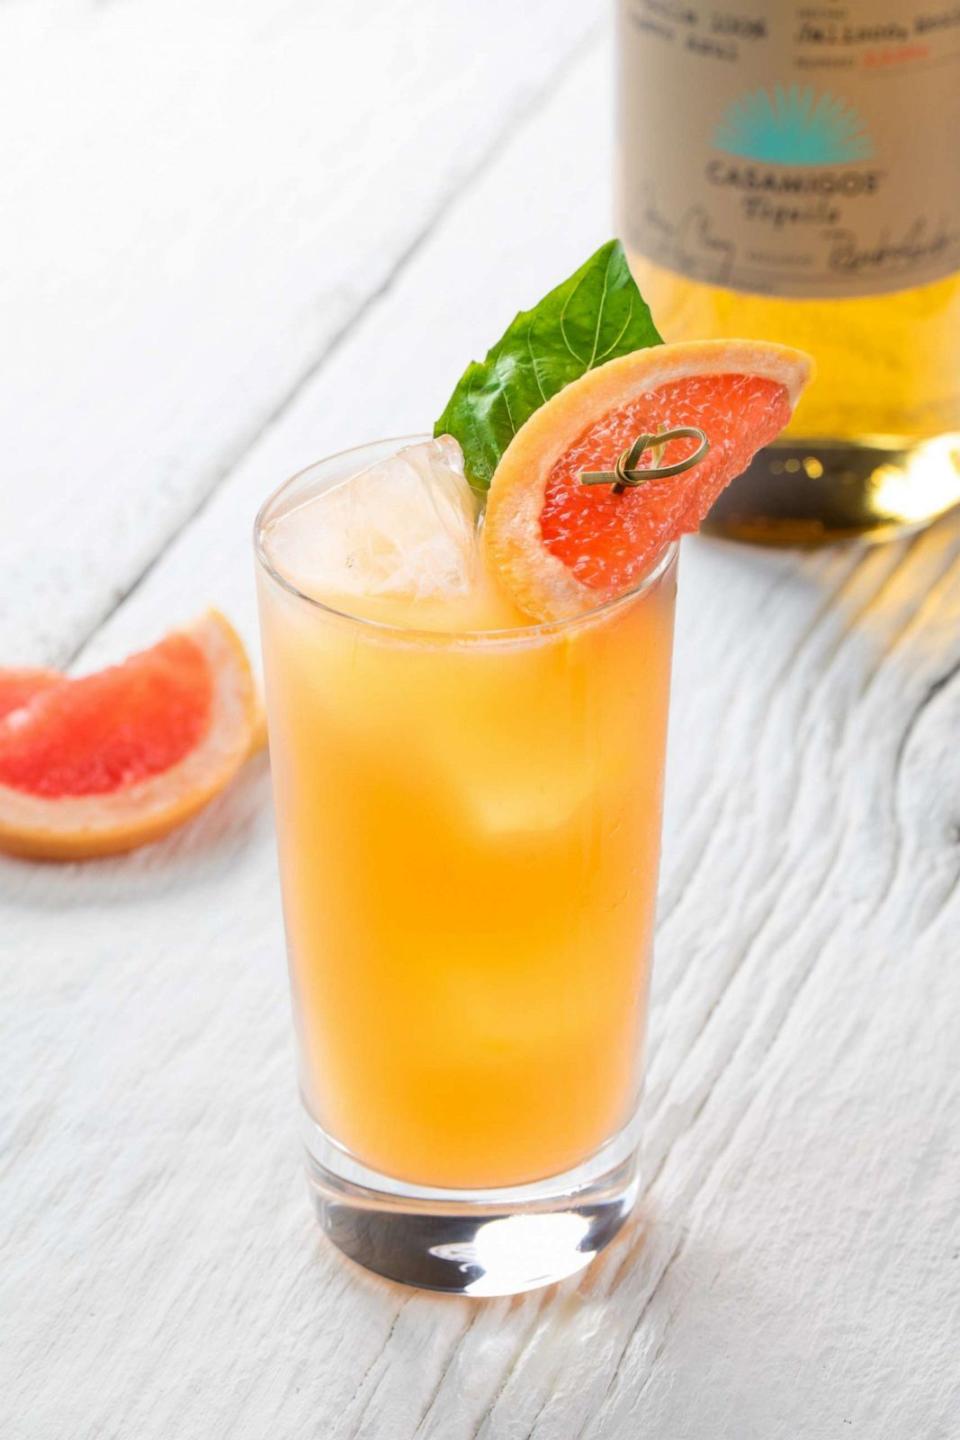 PHOTO: The Paloma combines tequila, fresh grapefruit and lime juice with a splash of soda. (Casamigos Tequila and Mezcal)